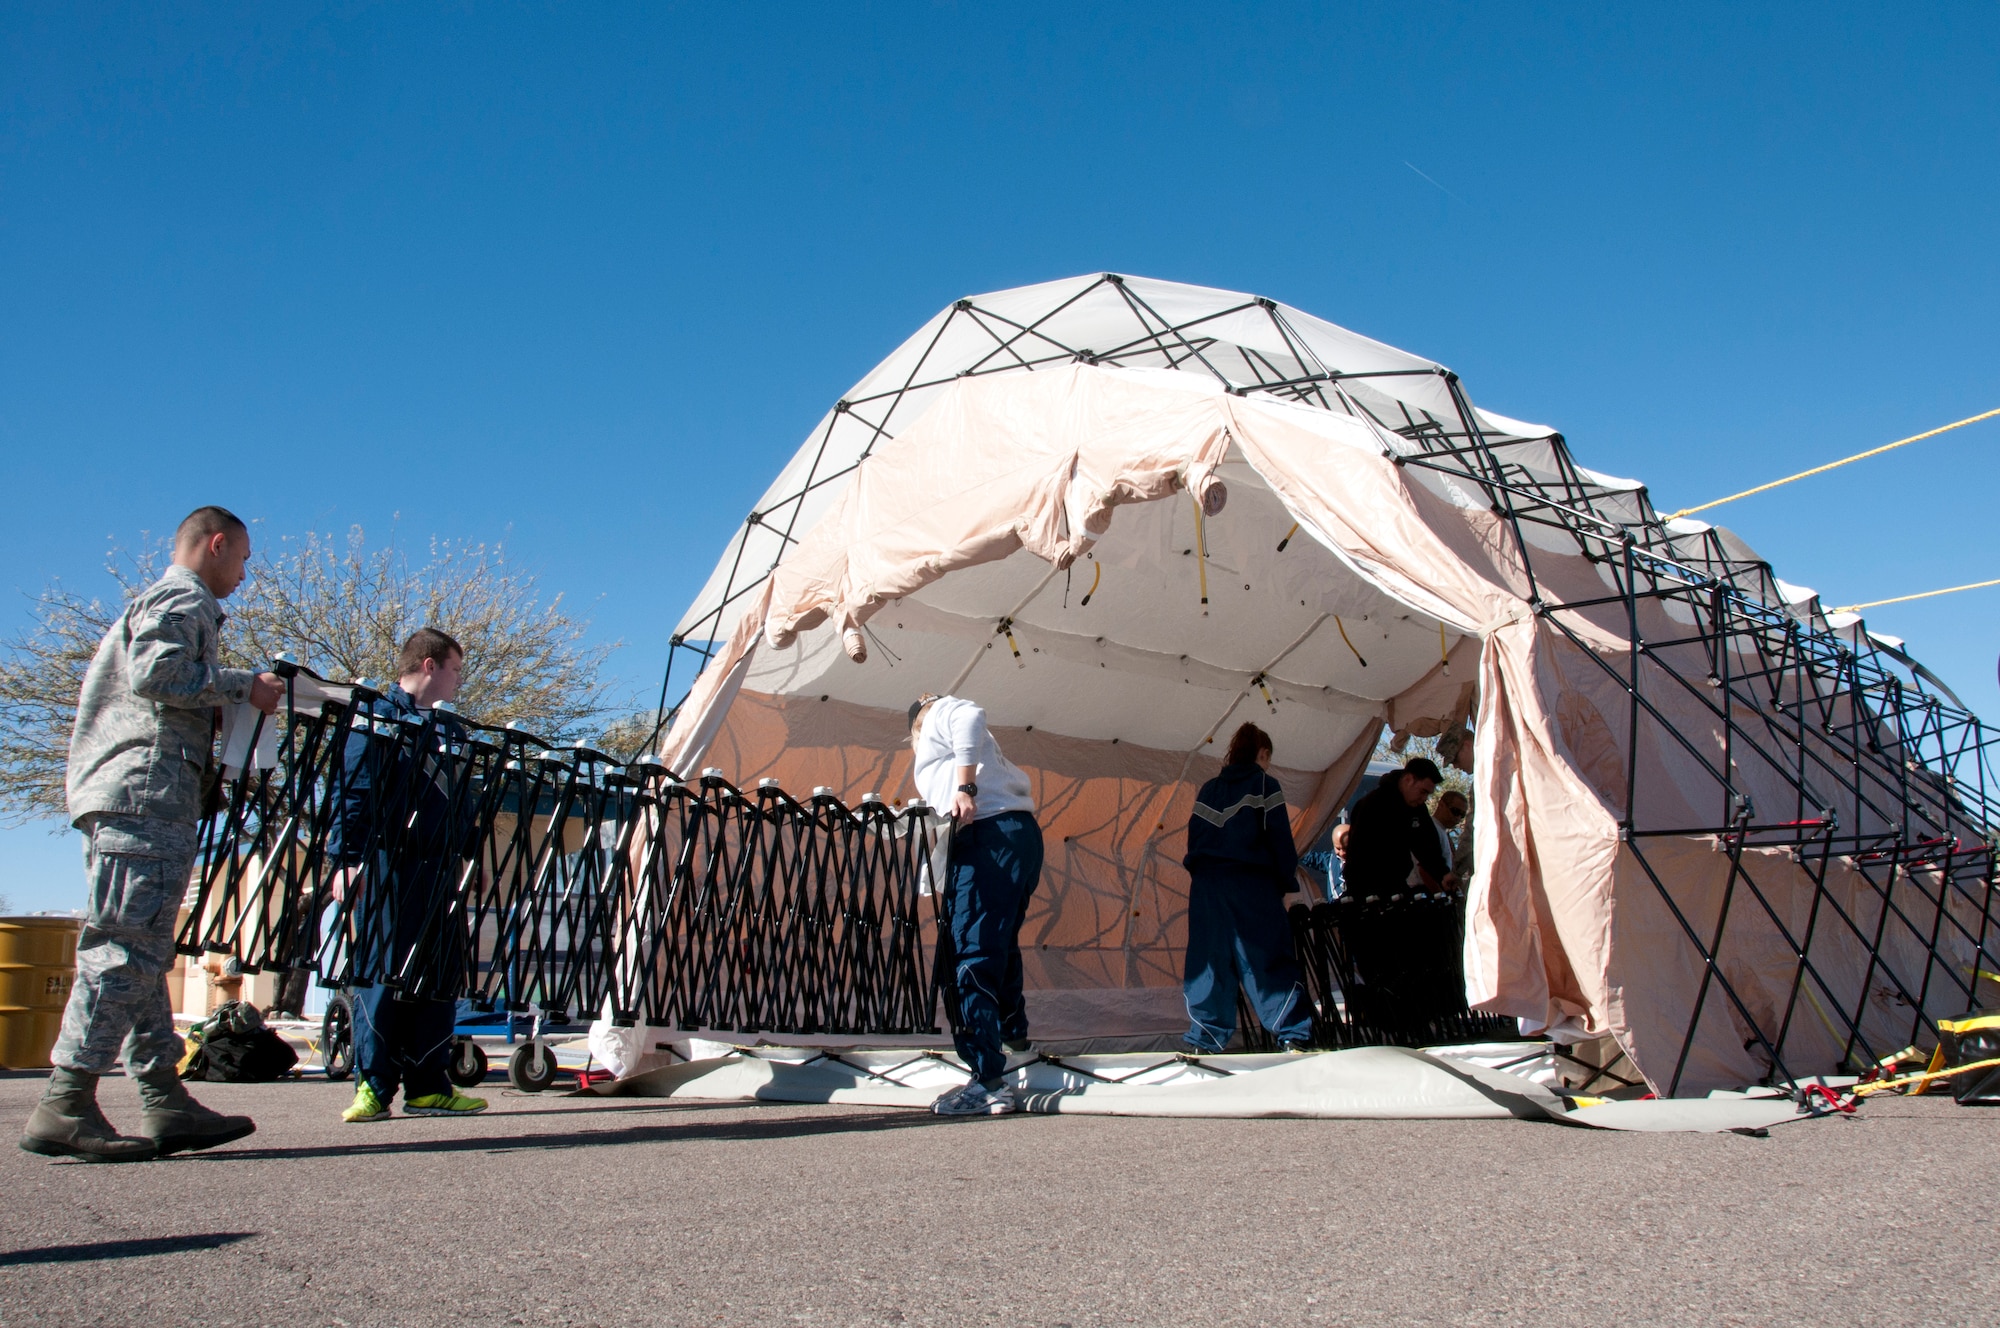 Members of the 162nd Fighter Wing, Tucson Ariz. construct a shelter used for
the decontamination of patients affected by chemical, biological,
radiological or nuclear (CBRN) contamination.  Medical Counter (MC)-CBRN
equipment packages such as this are being positioned at Air National Guard
installations throughout the United Sates to support domestic operations
involving the accidental or intentional terrorist use of CBRN materials.
(U.S. Air Force photo by Master Sgt. David Neve/Released)
